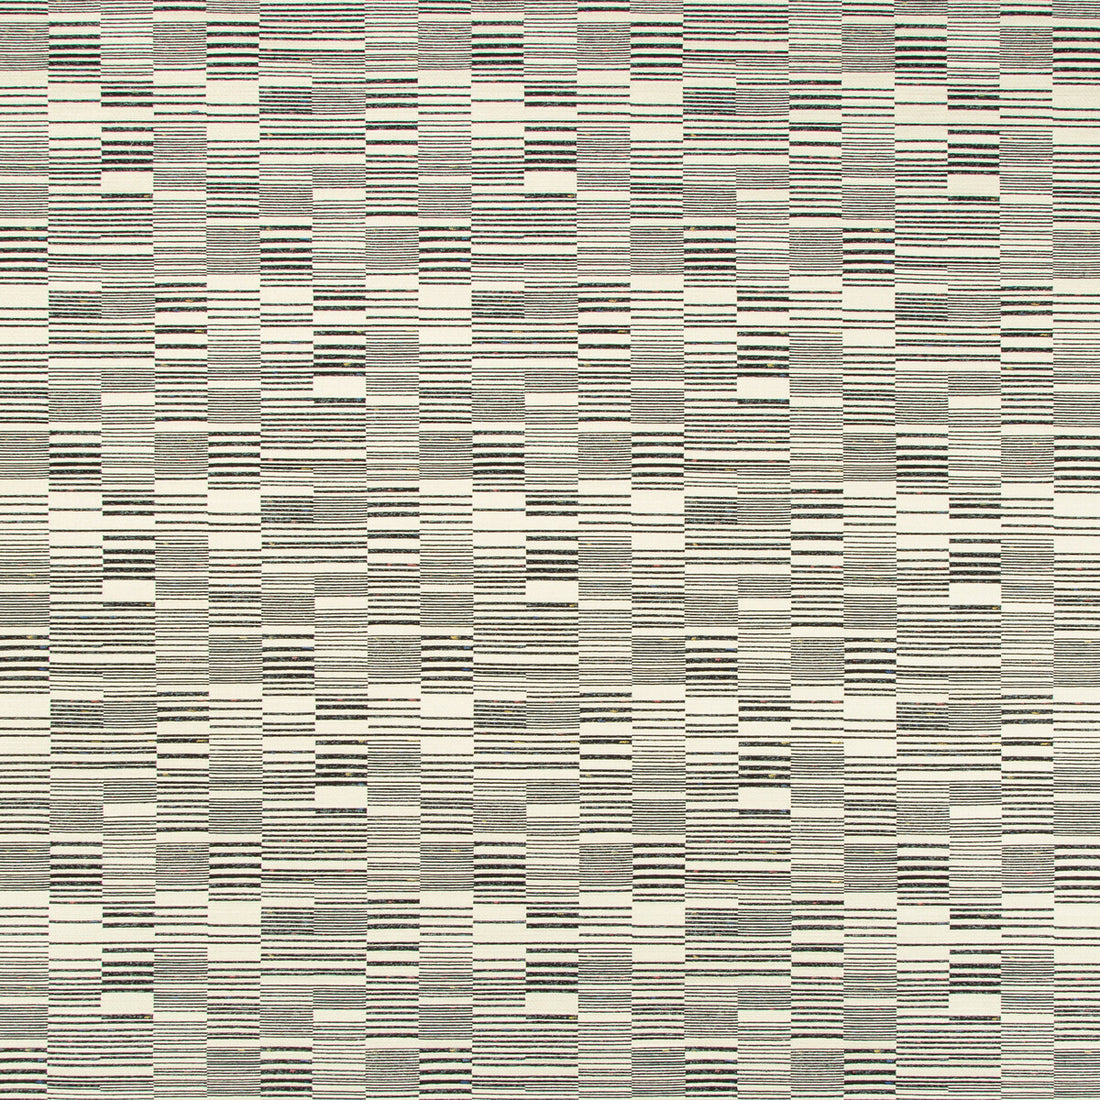 Xaranna Grid fabric in neptune color - pattern 35368.81.0 - by Kravet Design in the Barclay Butera Sagamore collection